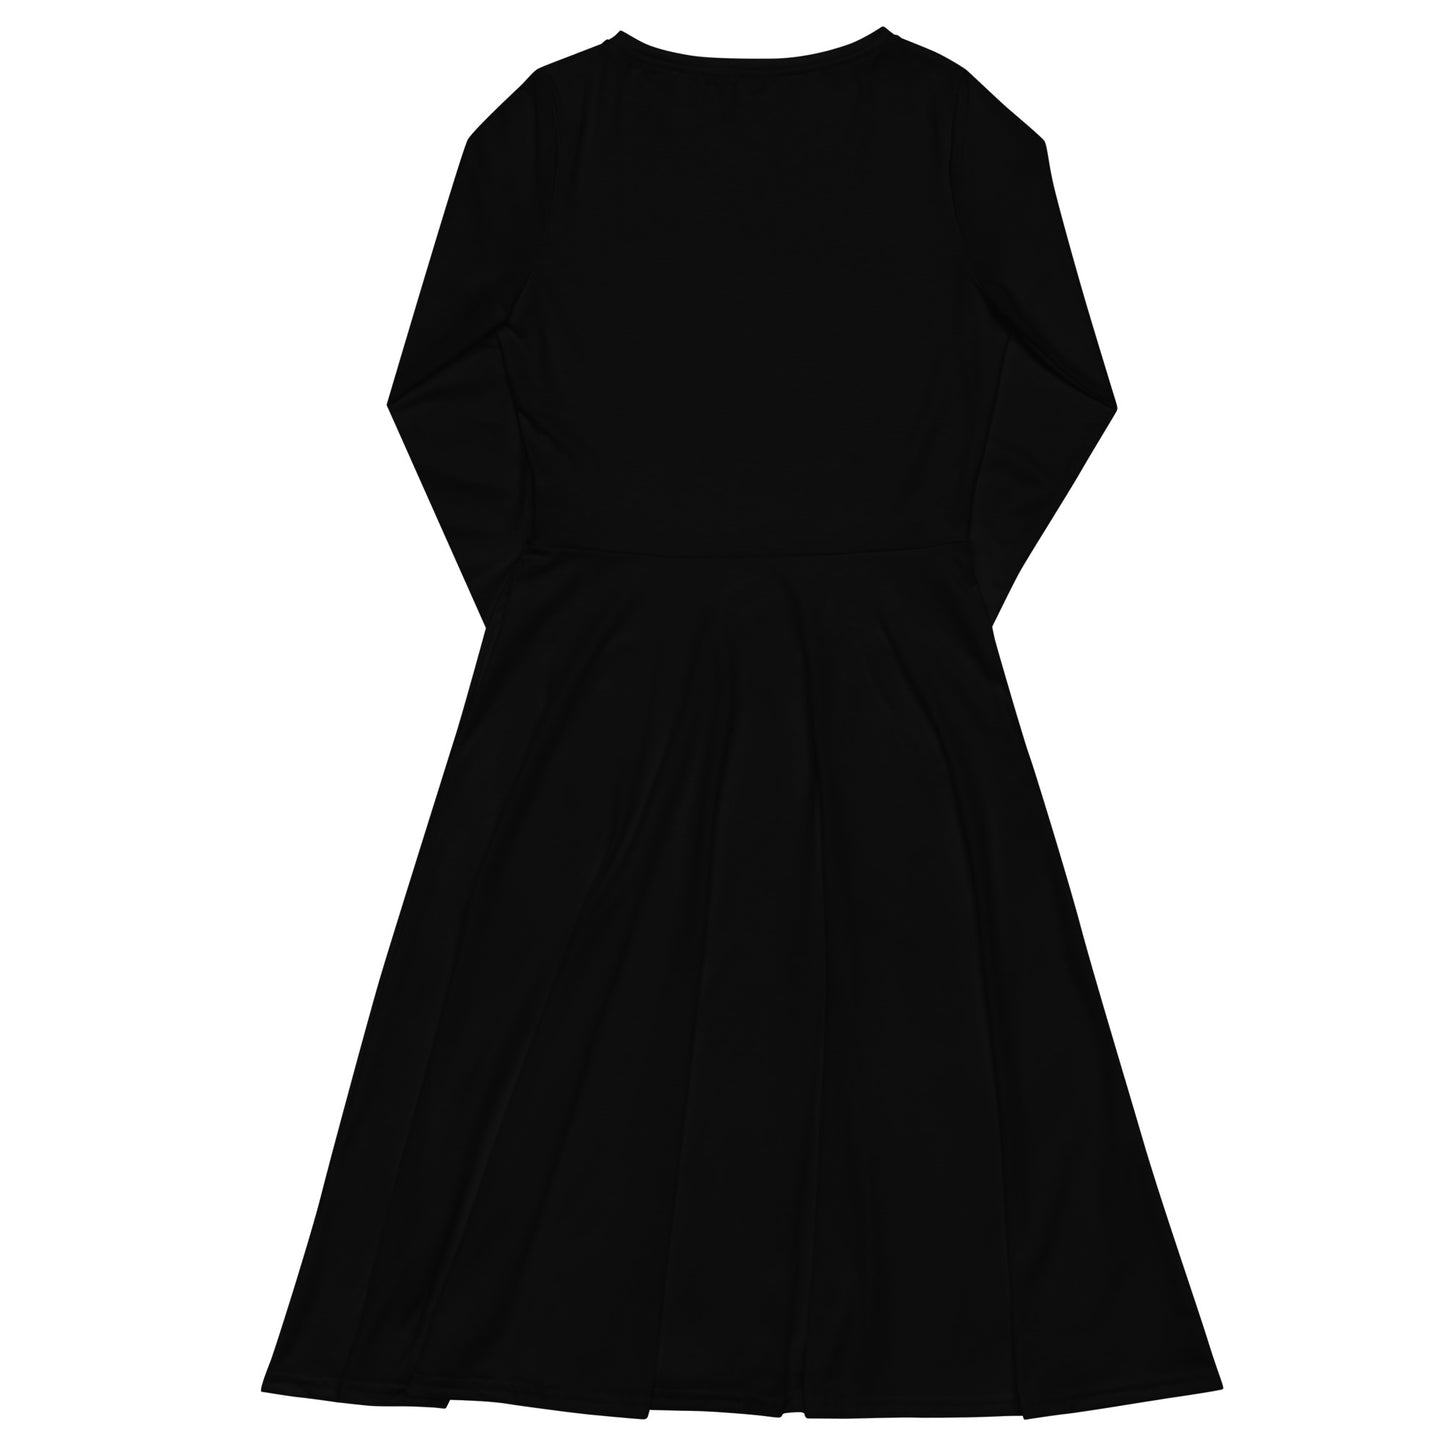 FUNKYPUP black - just pup - Midi dress with long sleeves and handy pockets